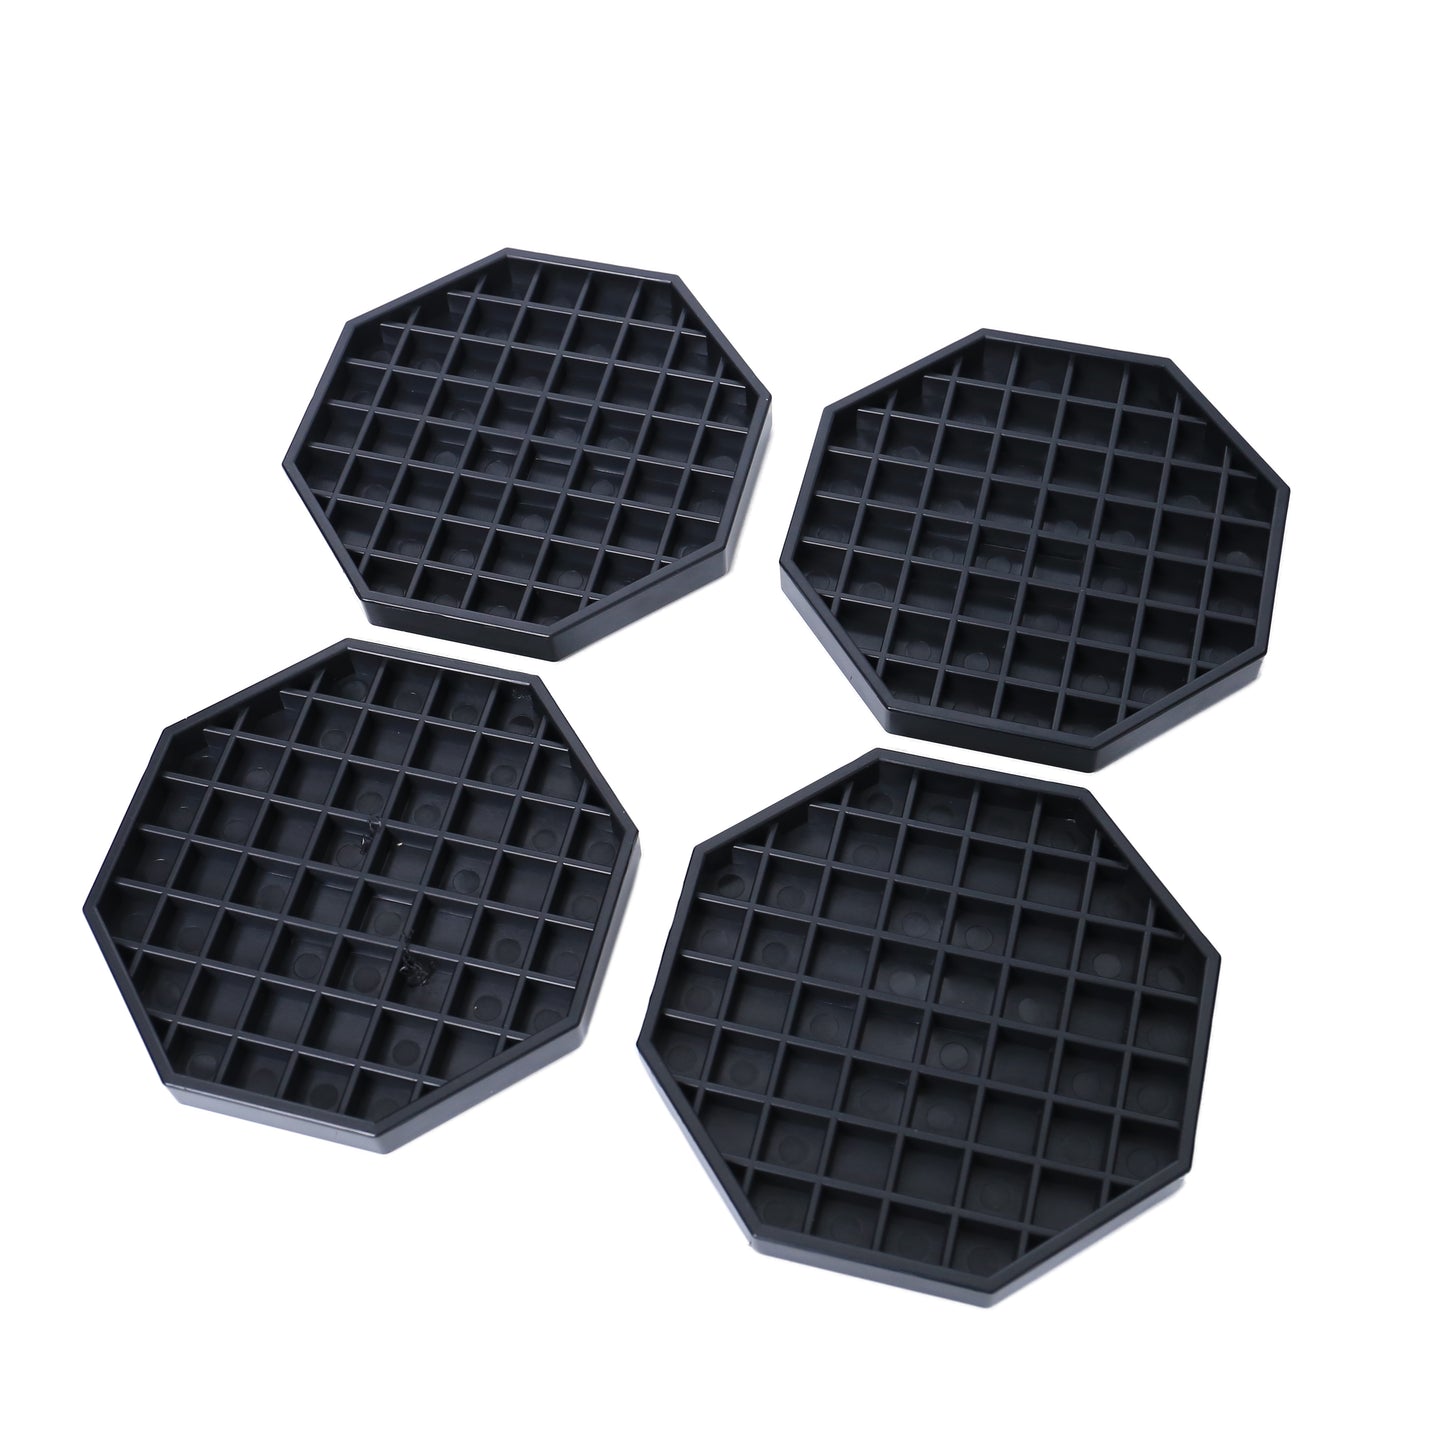 Coffee Drip Trays - Pack of 4